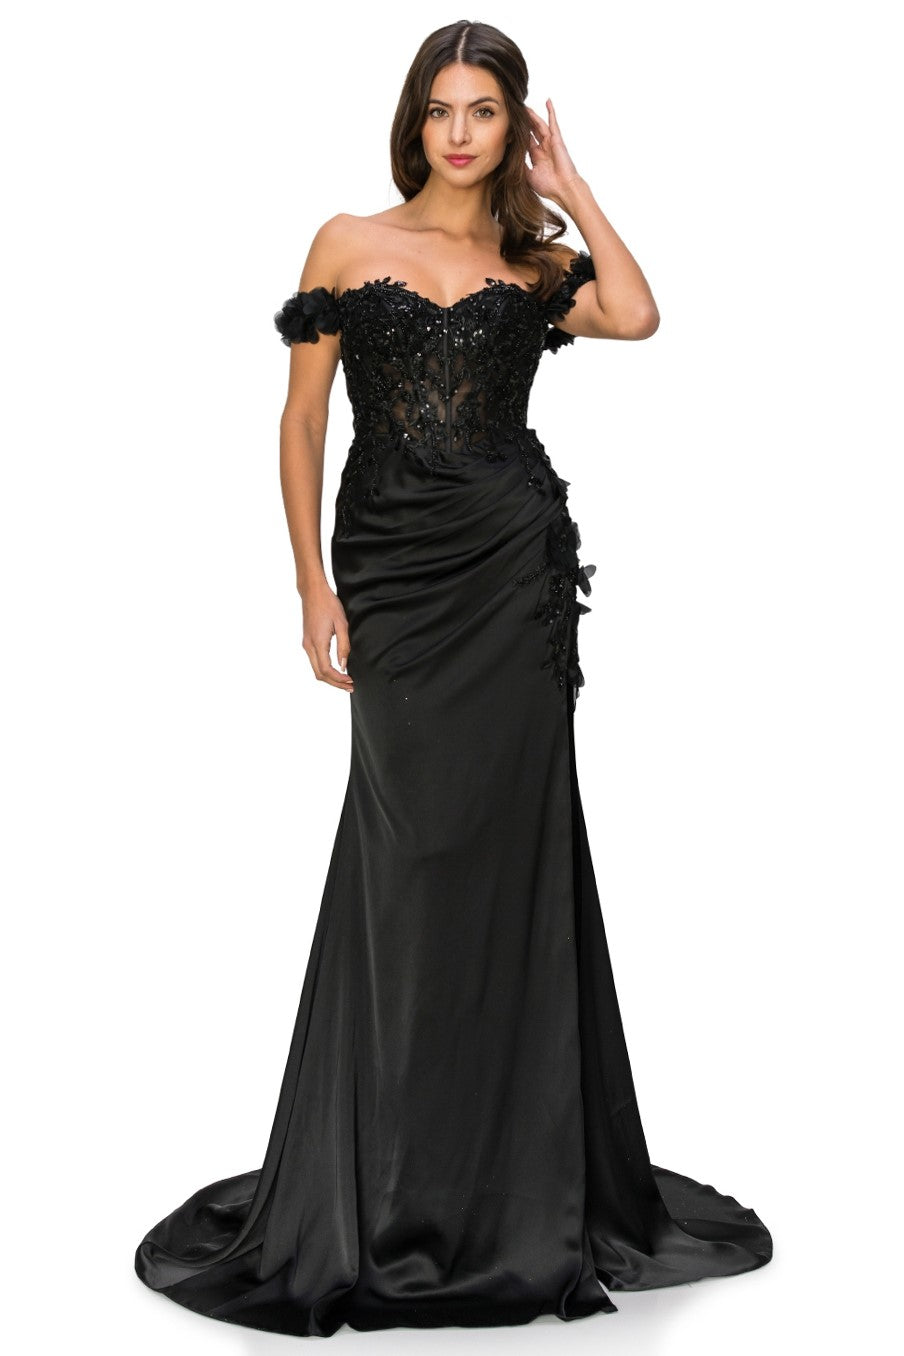 Black Floral Off The Shoulder Gown AS8050J - Special Occasion-Curves